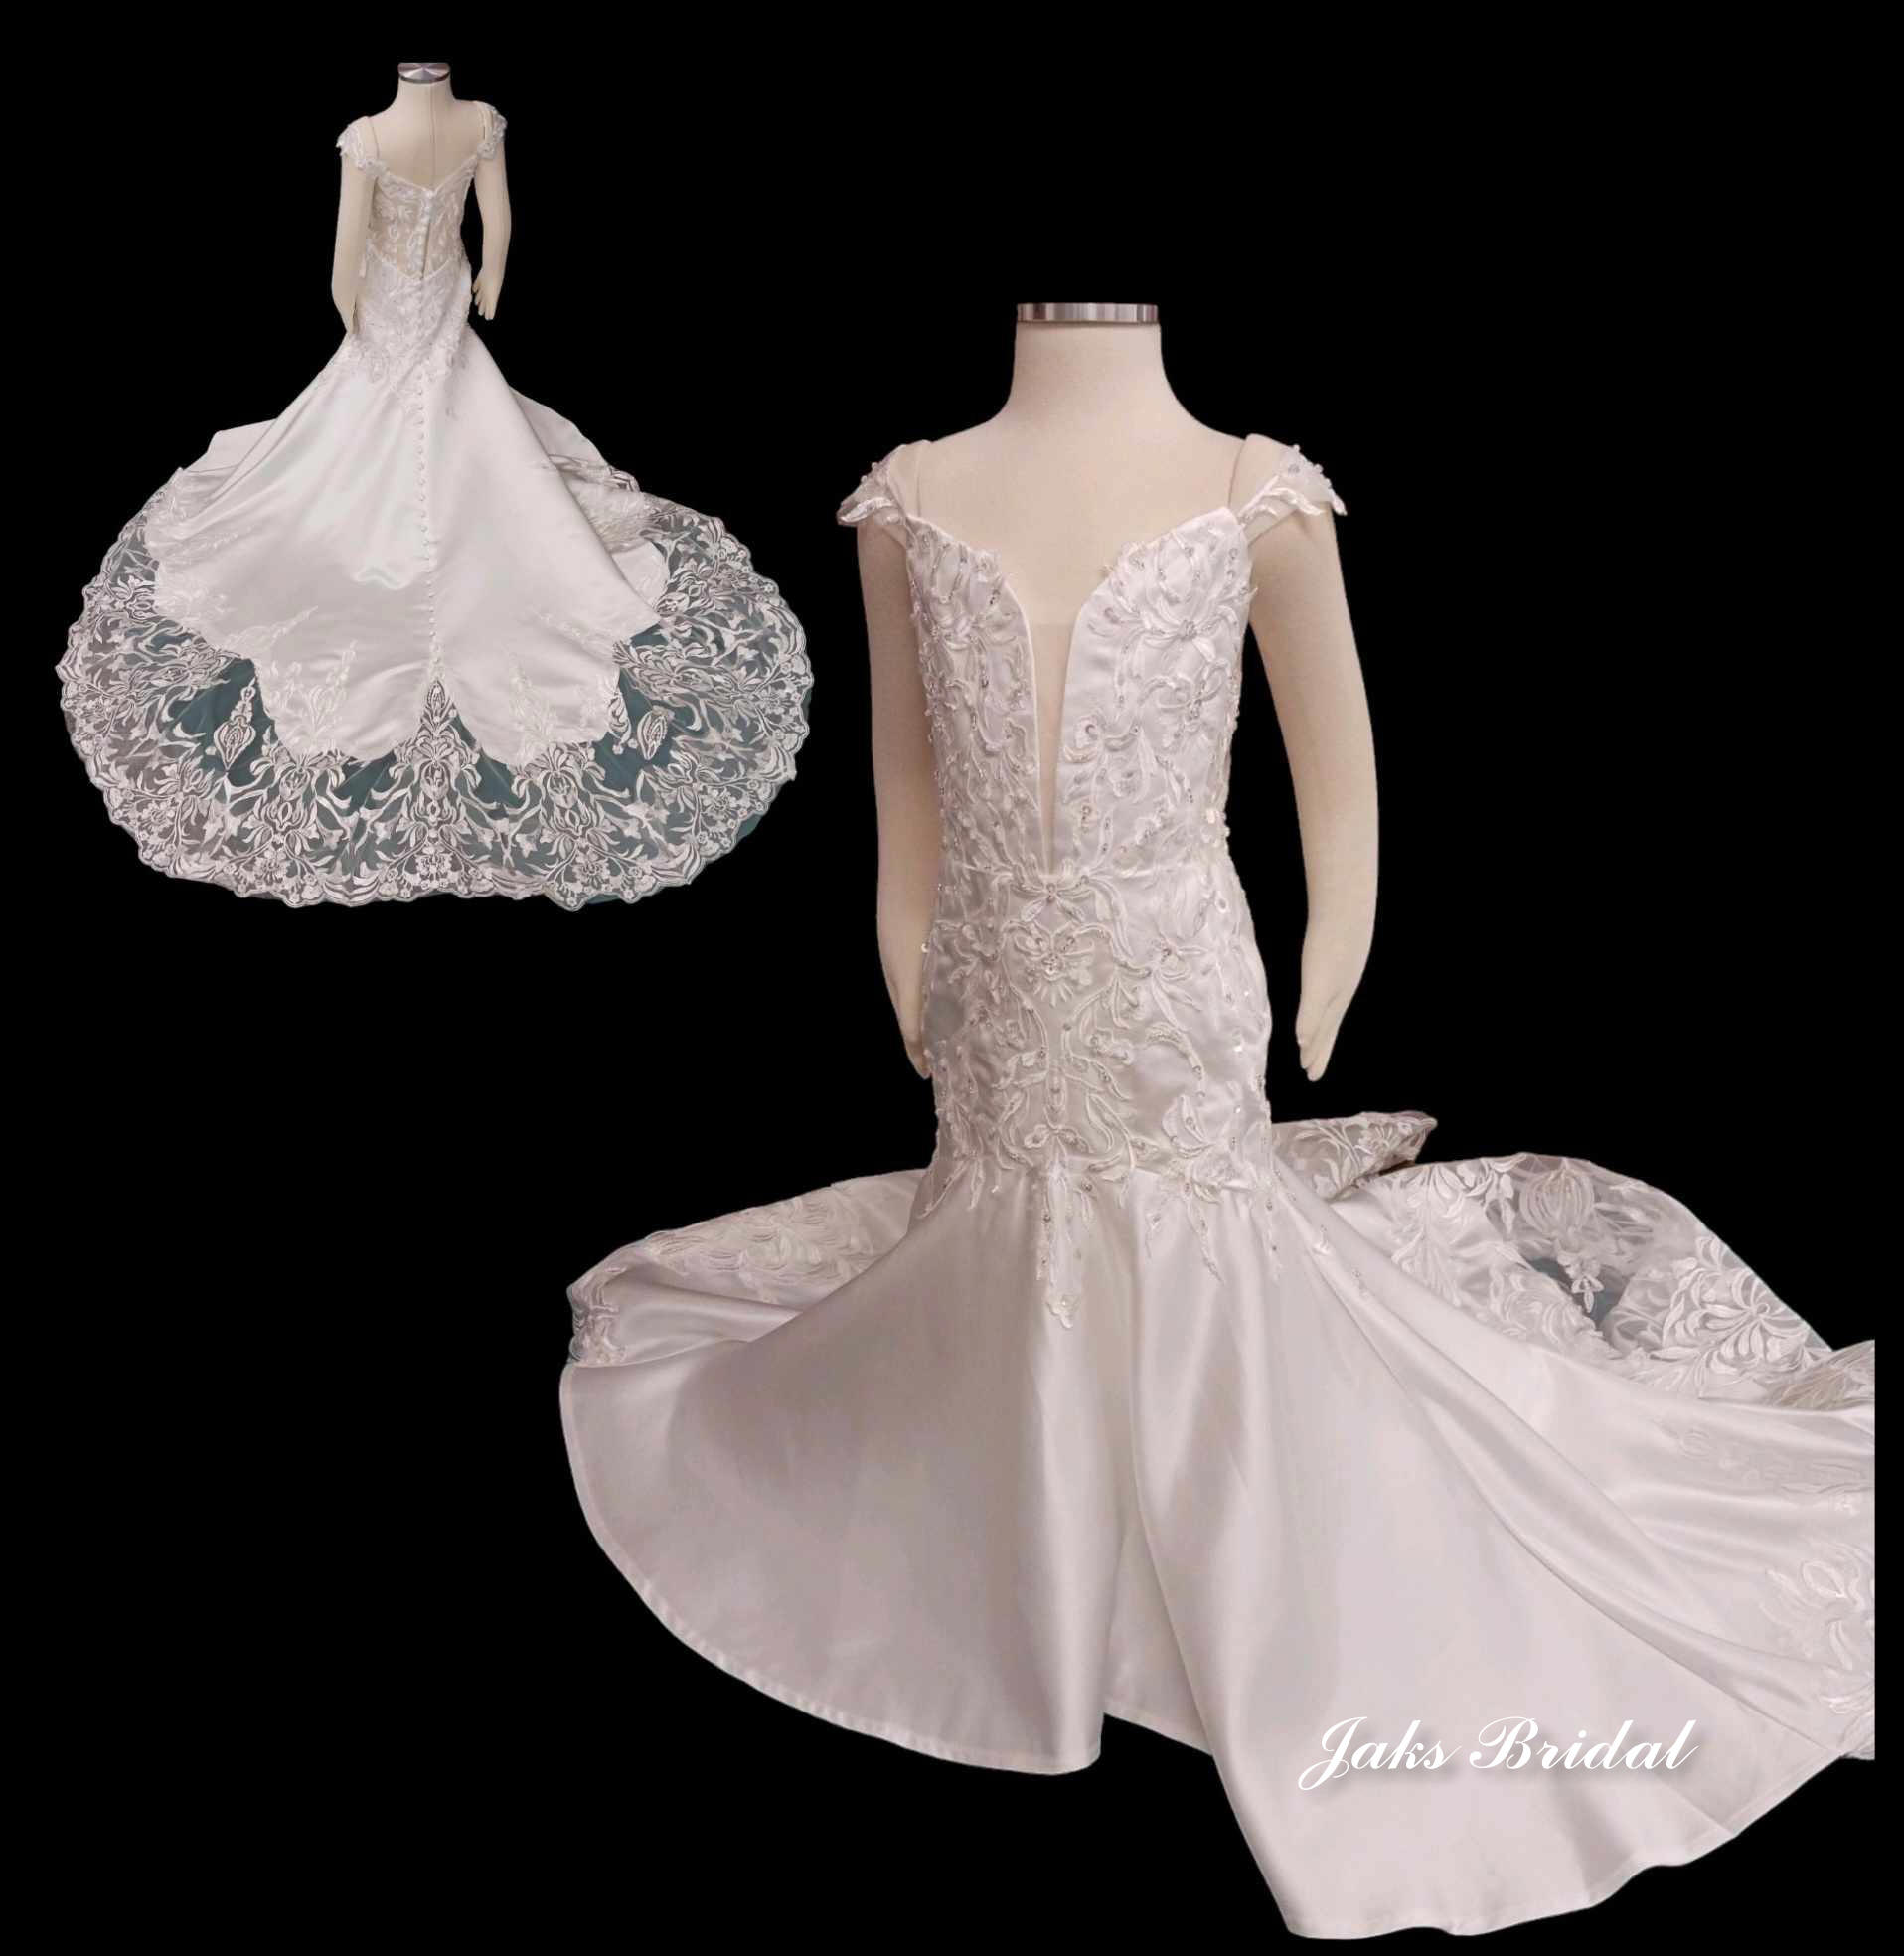 This mermaid dress has a plunging neckline with an illusion lace back. The cathedral train is adorned with lace appliques that match the bodice.